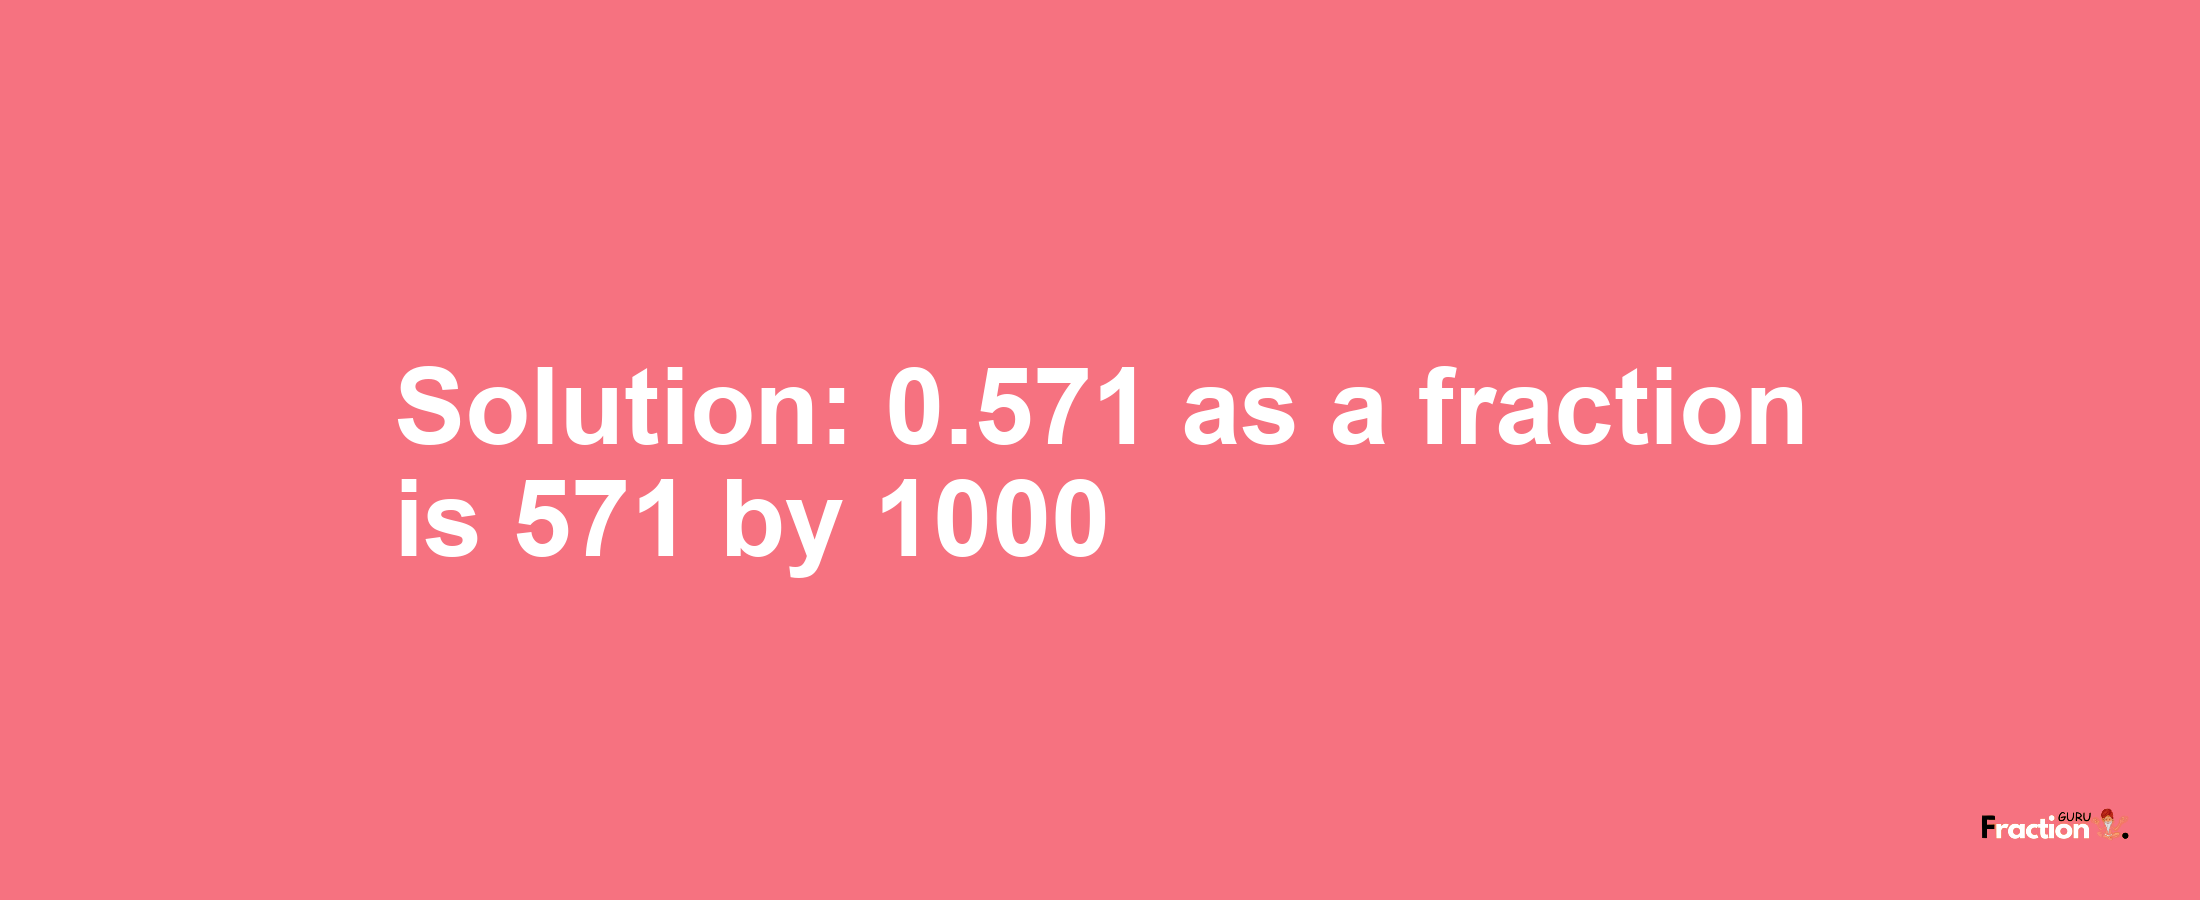 Solution:0.571 as a fraction is 571/1000